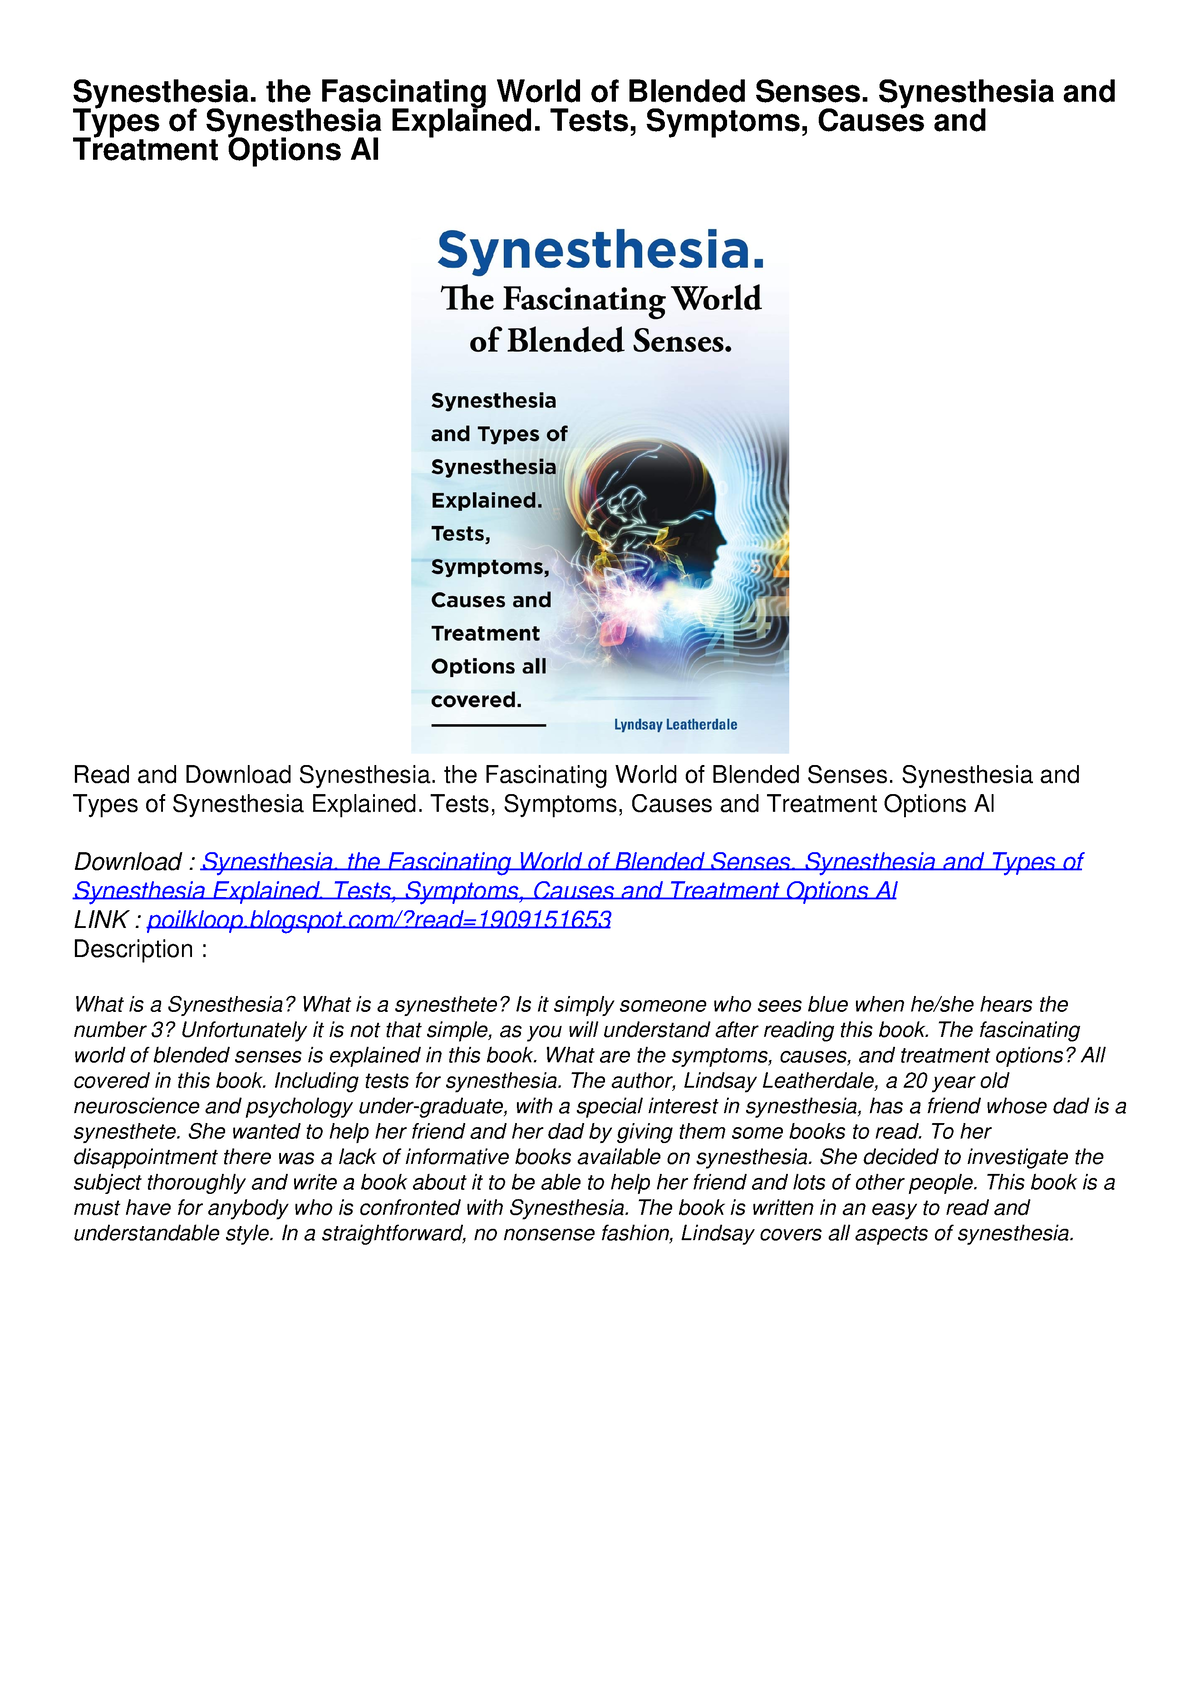 Download [pdf] Synesthesia The Fascinating World Of Blended Senses Synesthesia Synesthesia